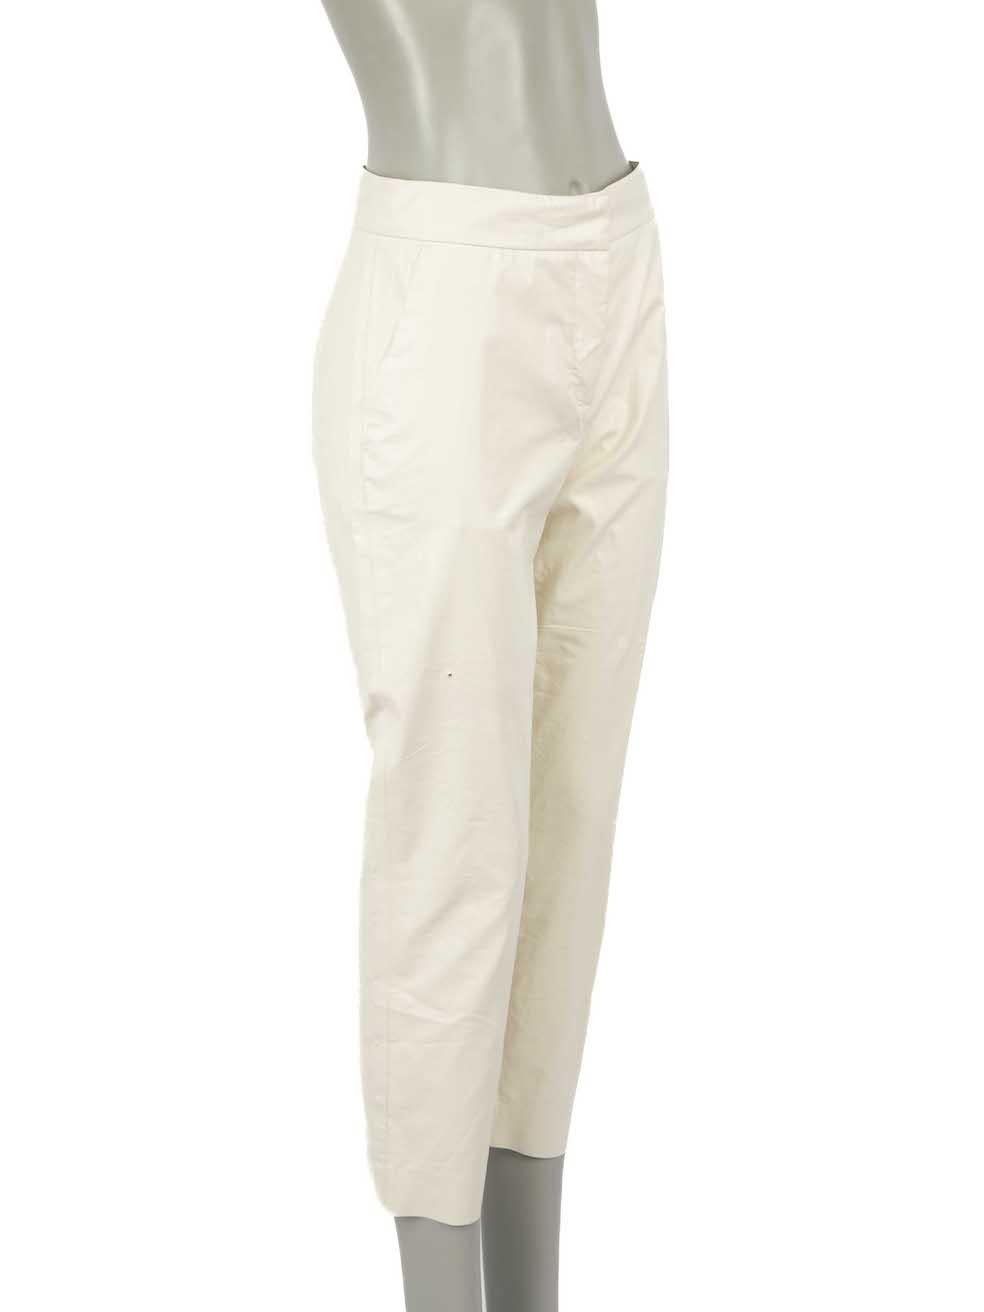 CONDITION is Good. Minor wear to trousers is evident. Light wear to PU surface with a handful of discoloured marks and small hole on right leg found throughout the front on this used MSGM designer resale item.
 
Details
White
Coated cotton
Straight